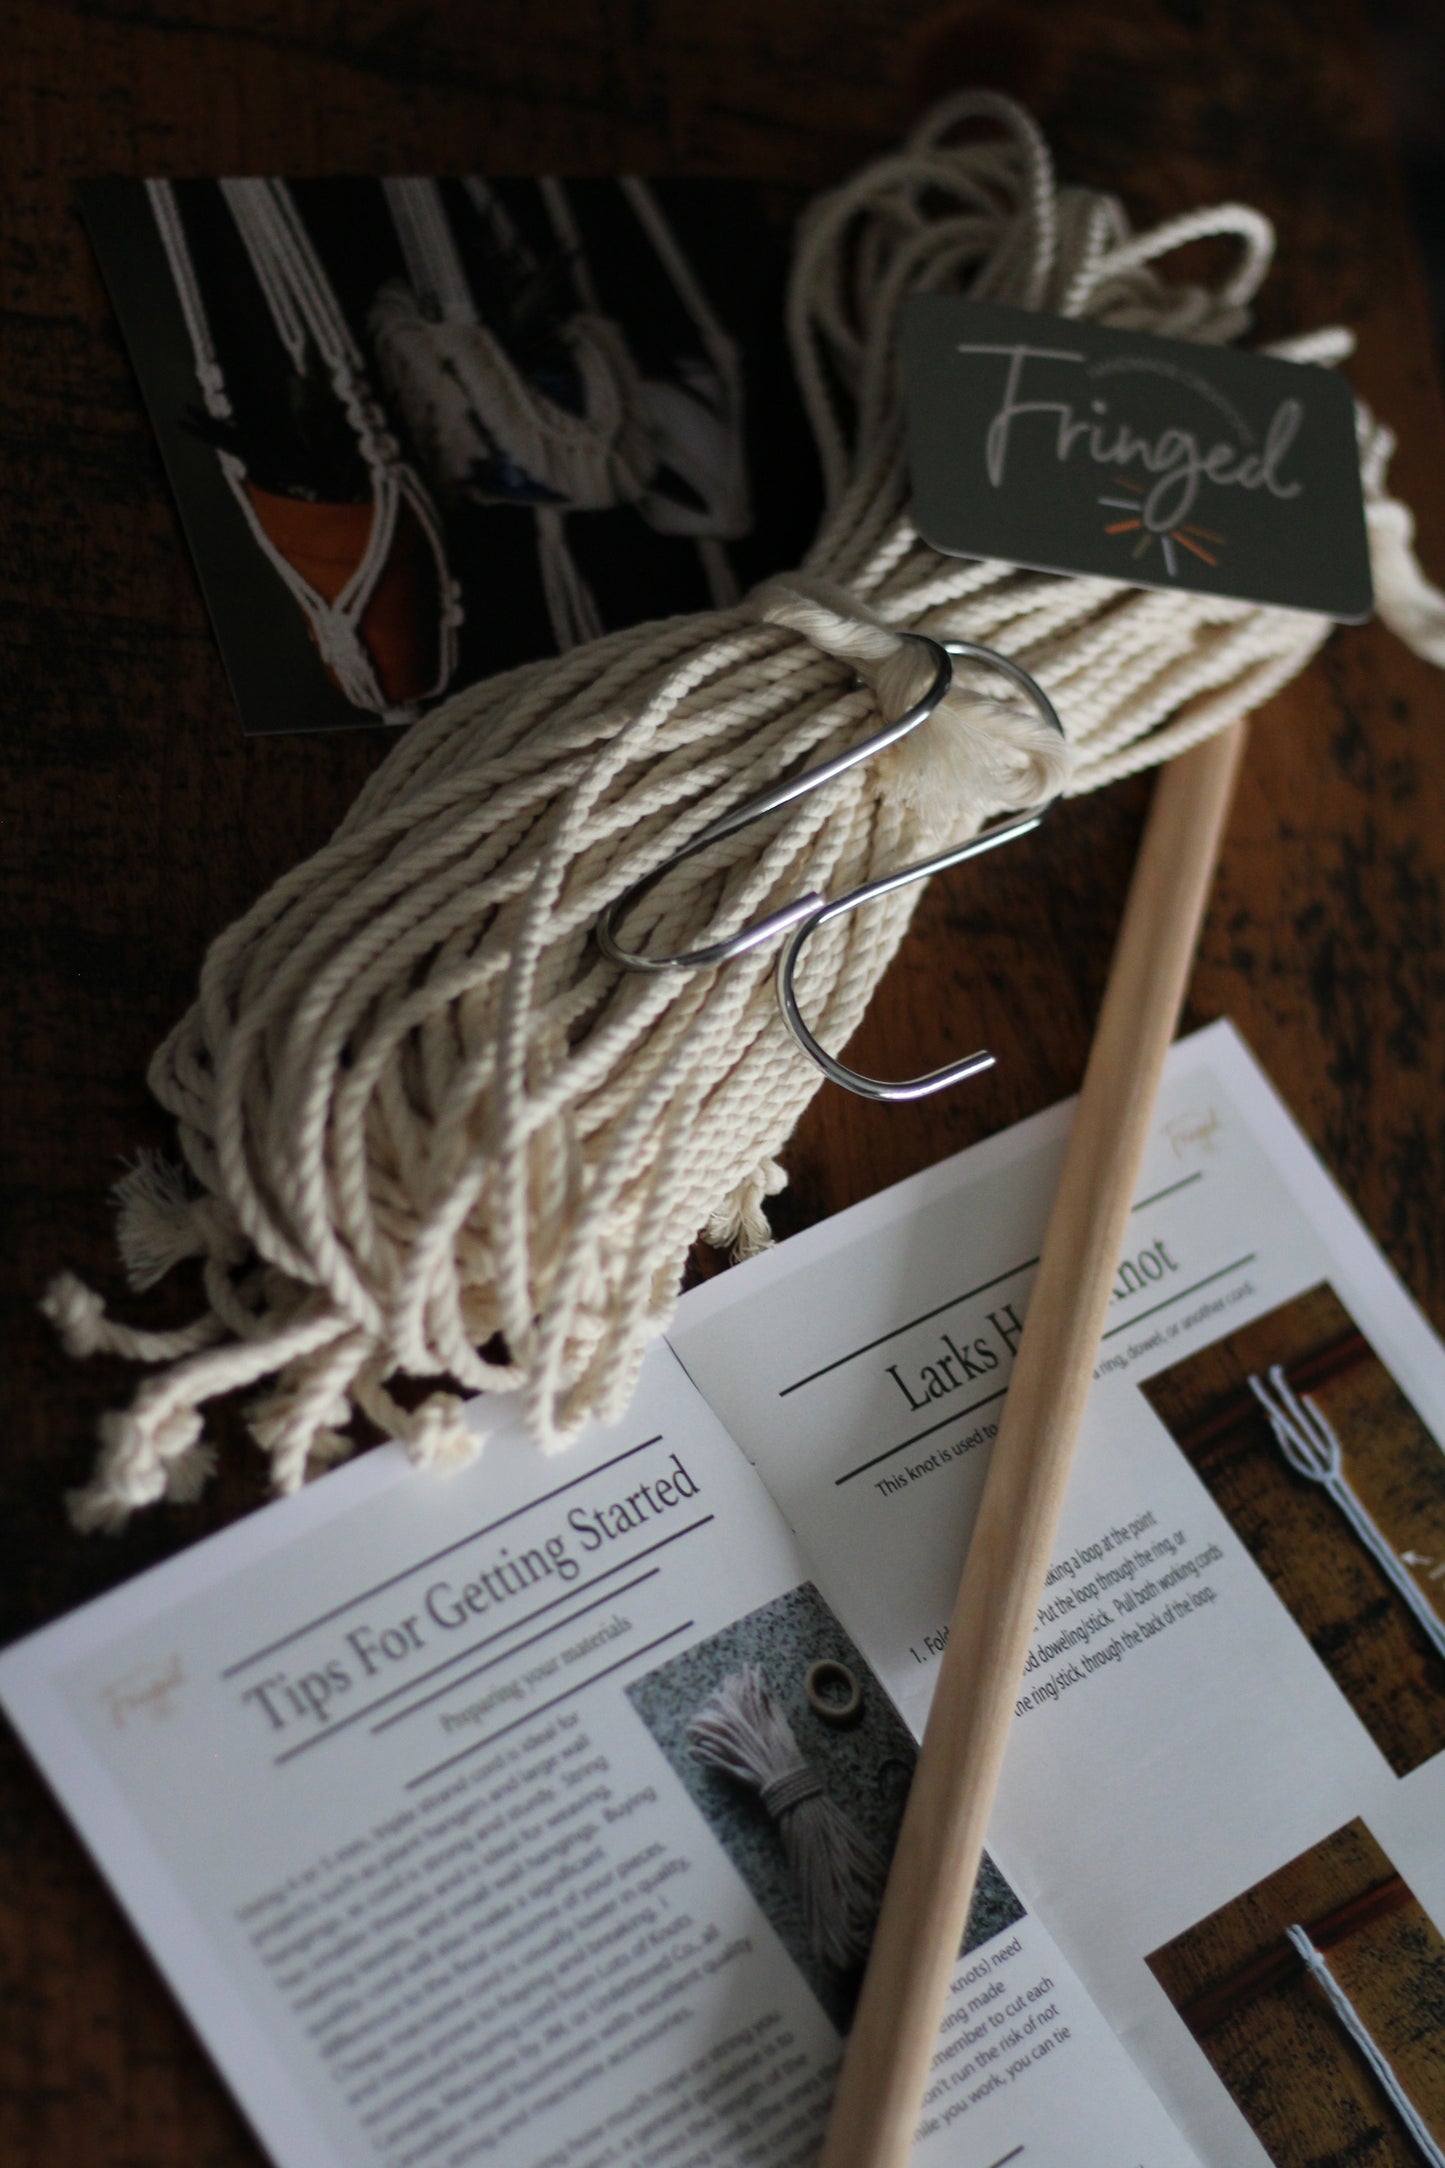 DIY Begonia Wall Hanging Kit with Macrame knots guide/instructions